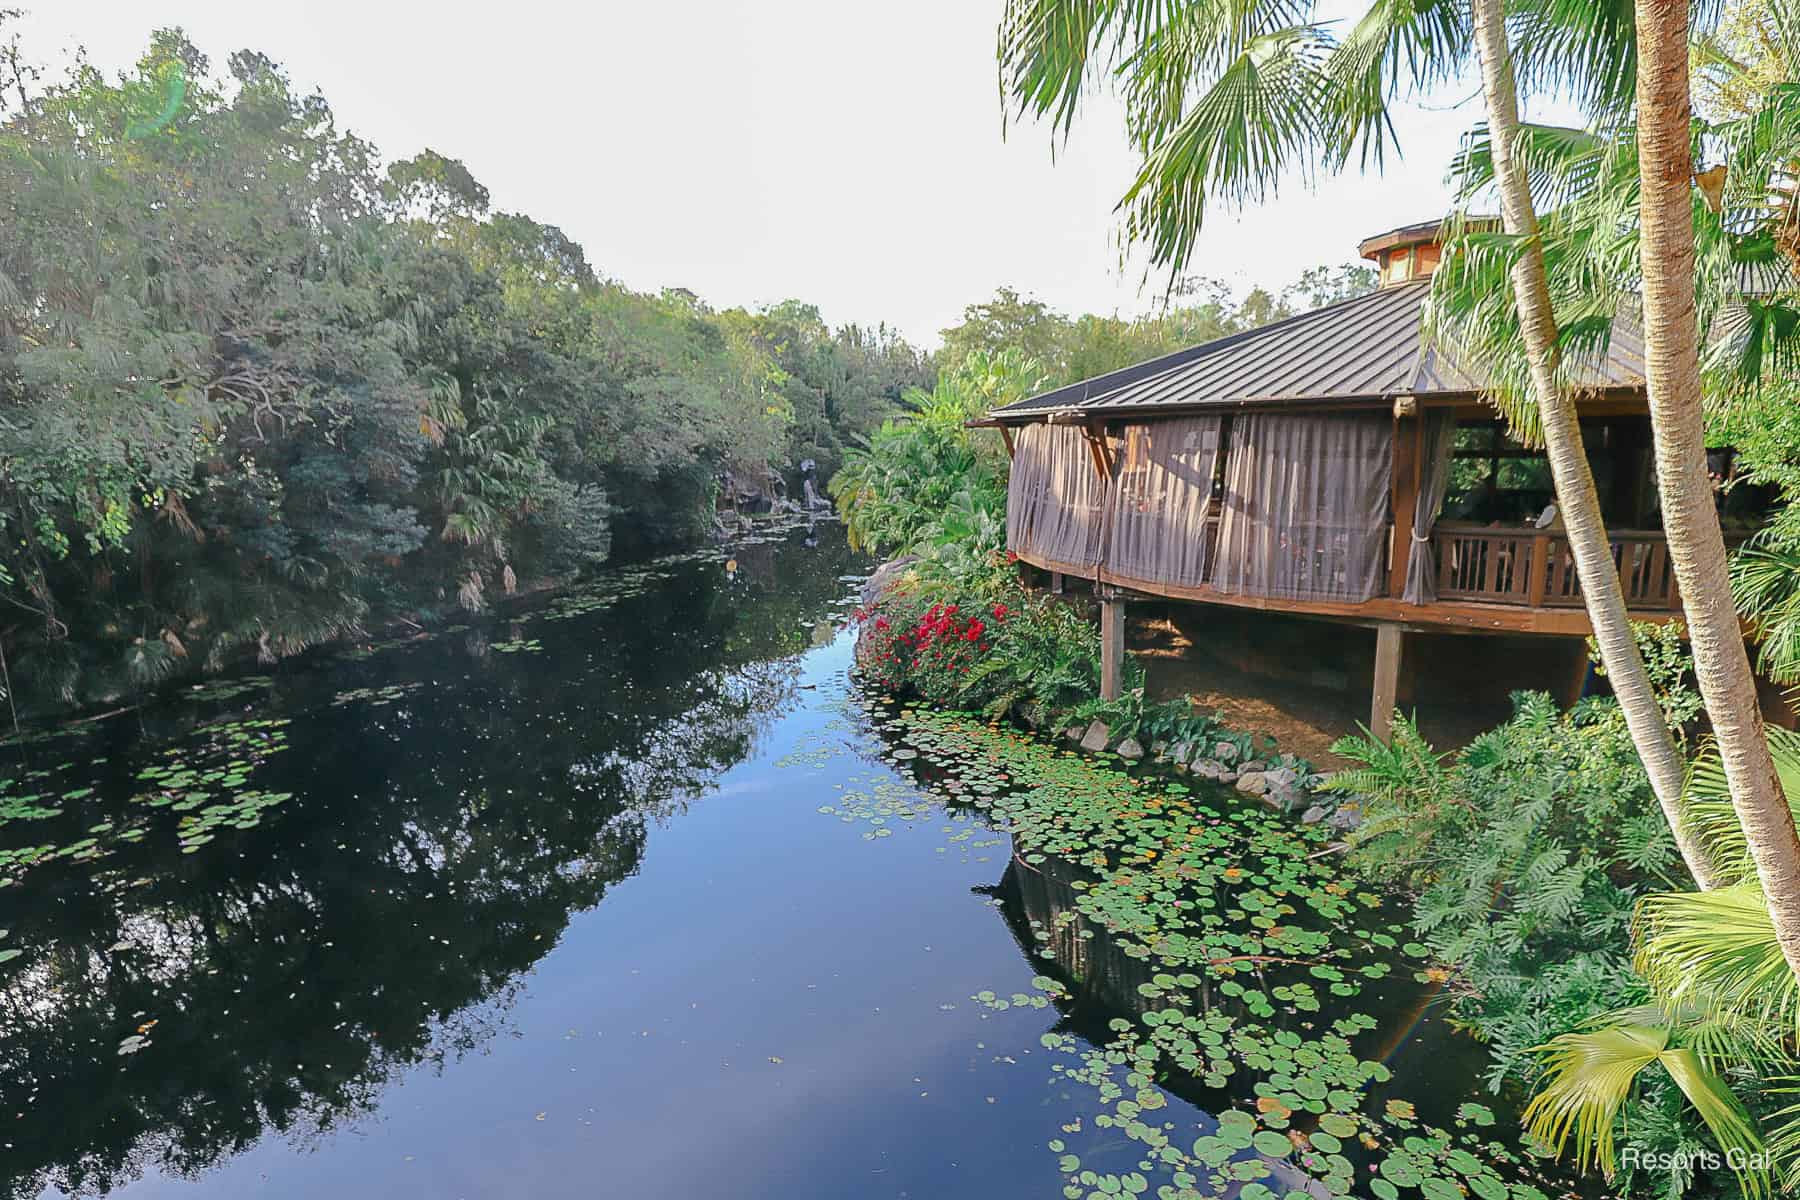 a view of the Discovery River from the bridge that leads to Pandora, World of Avatar 